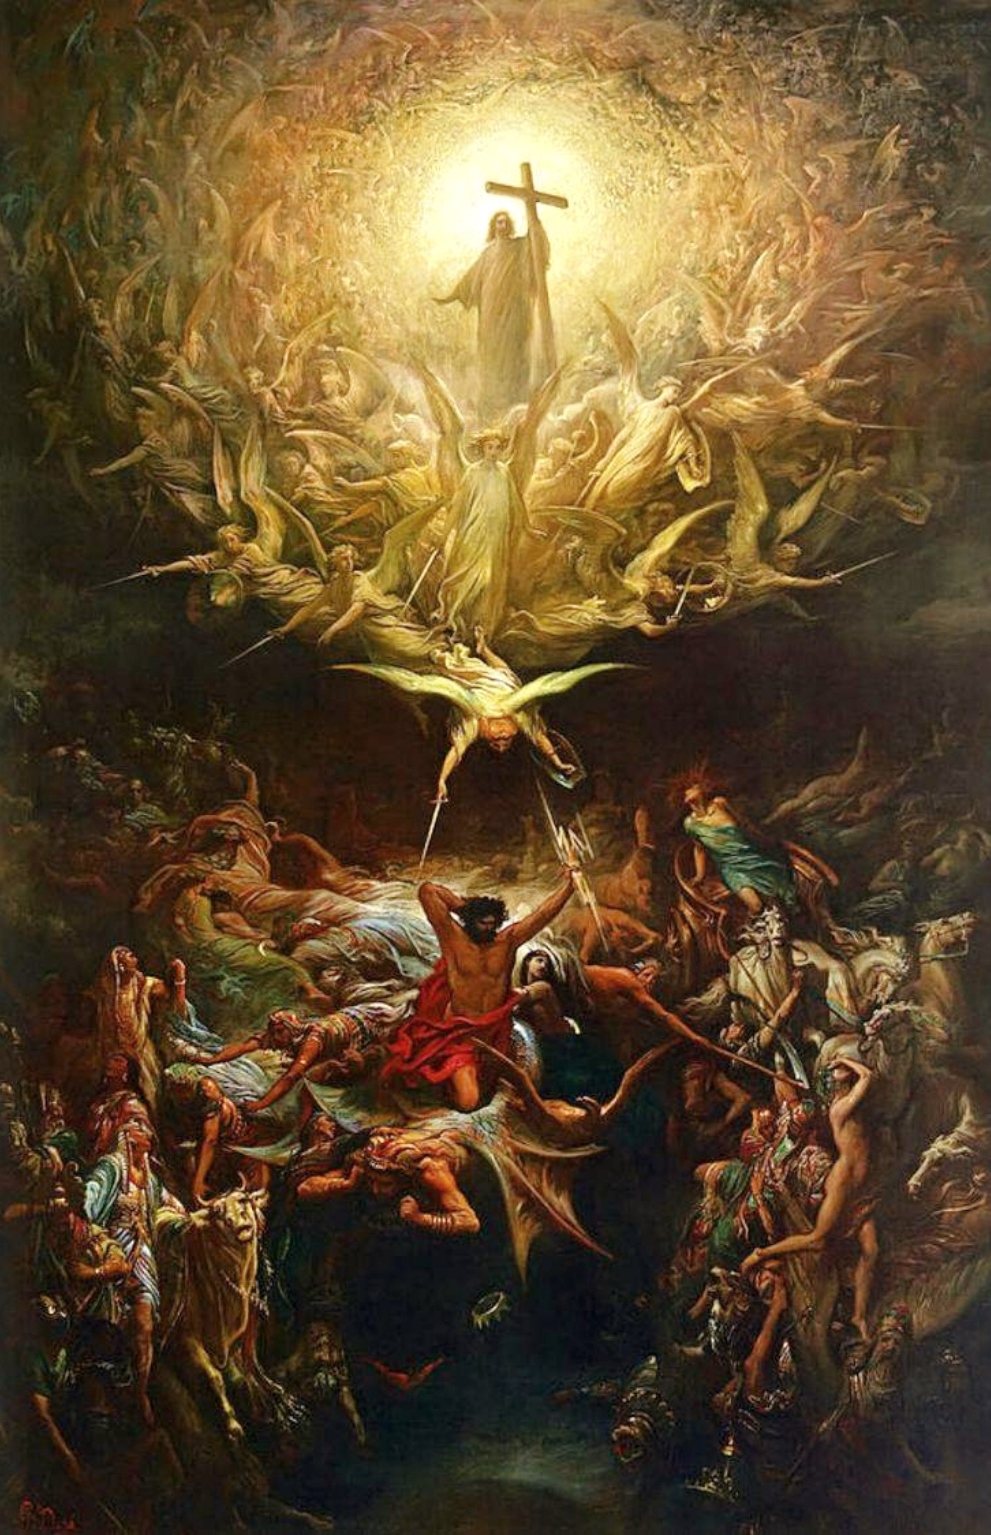 Gustave Doré, The Triumph Of Christianity Over Paganism, 1868?. (Image source: Wikipedia).